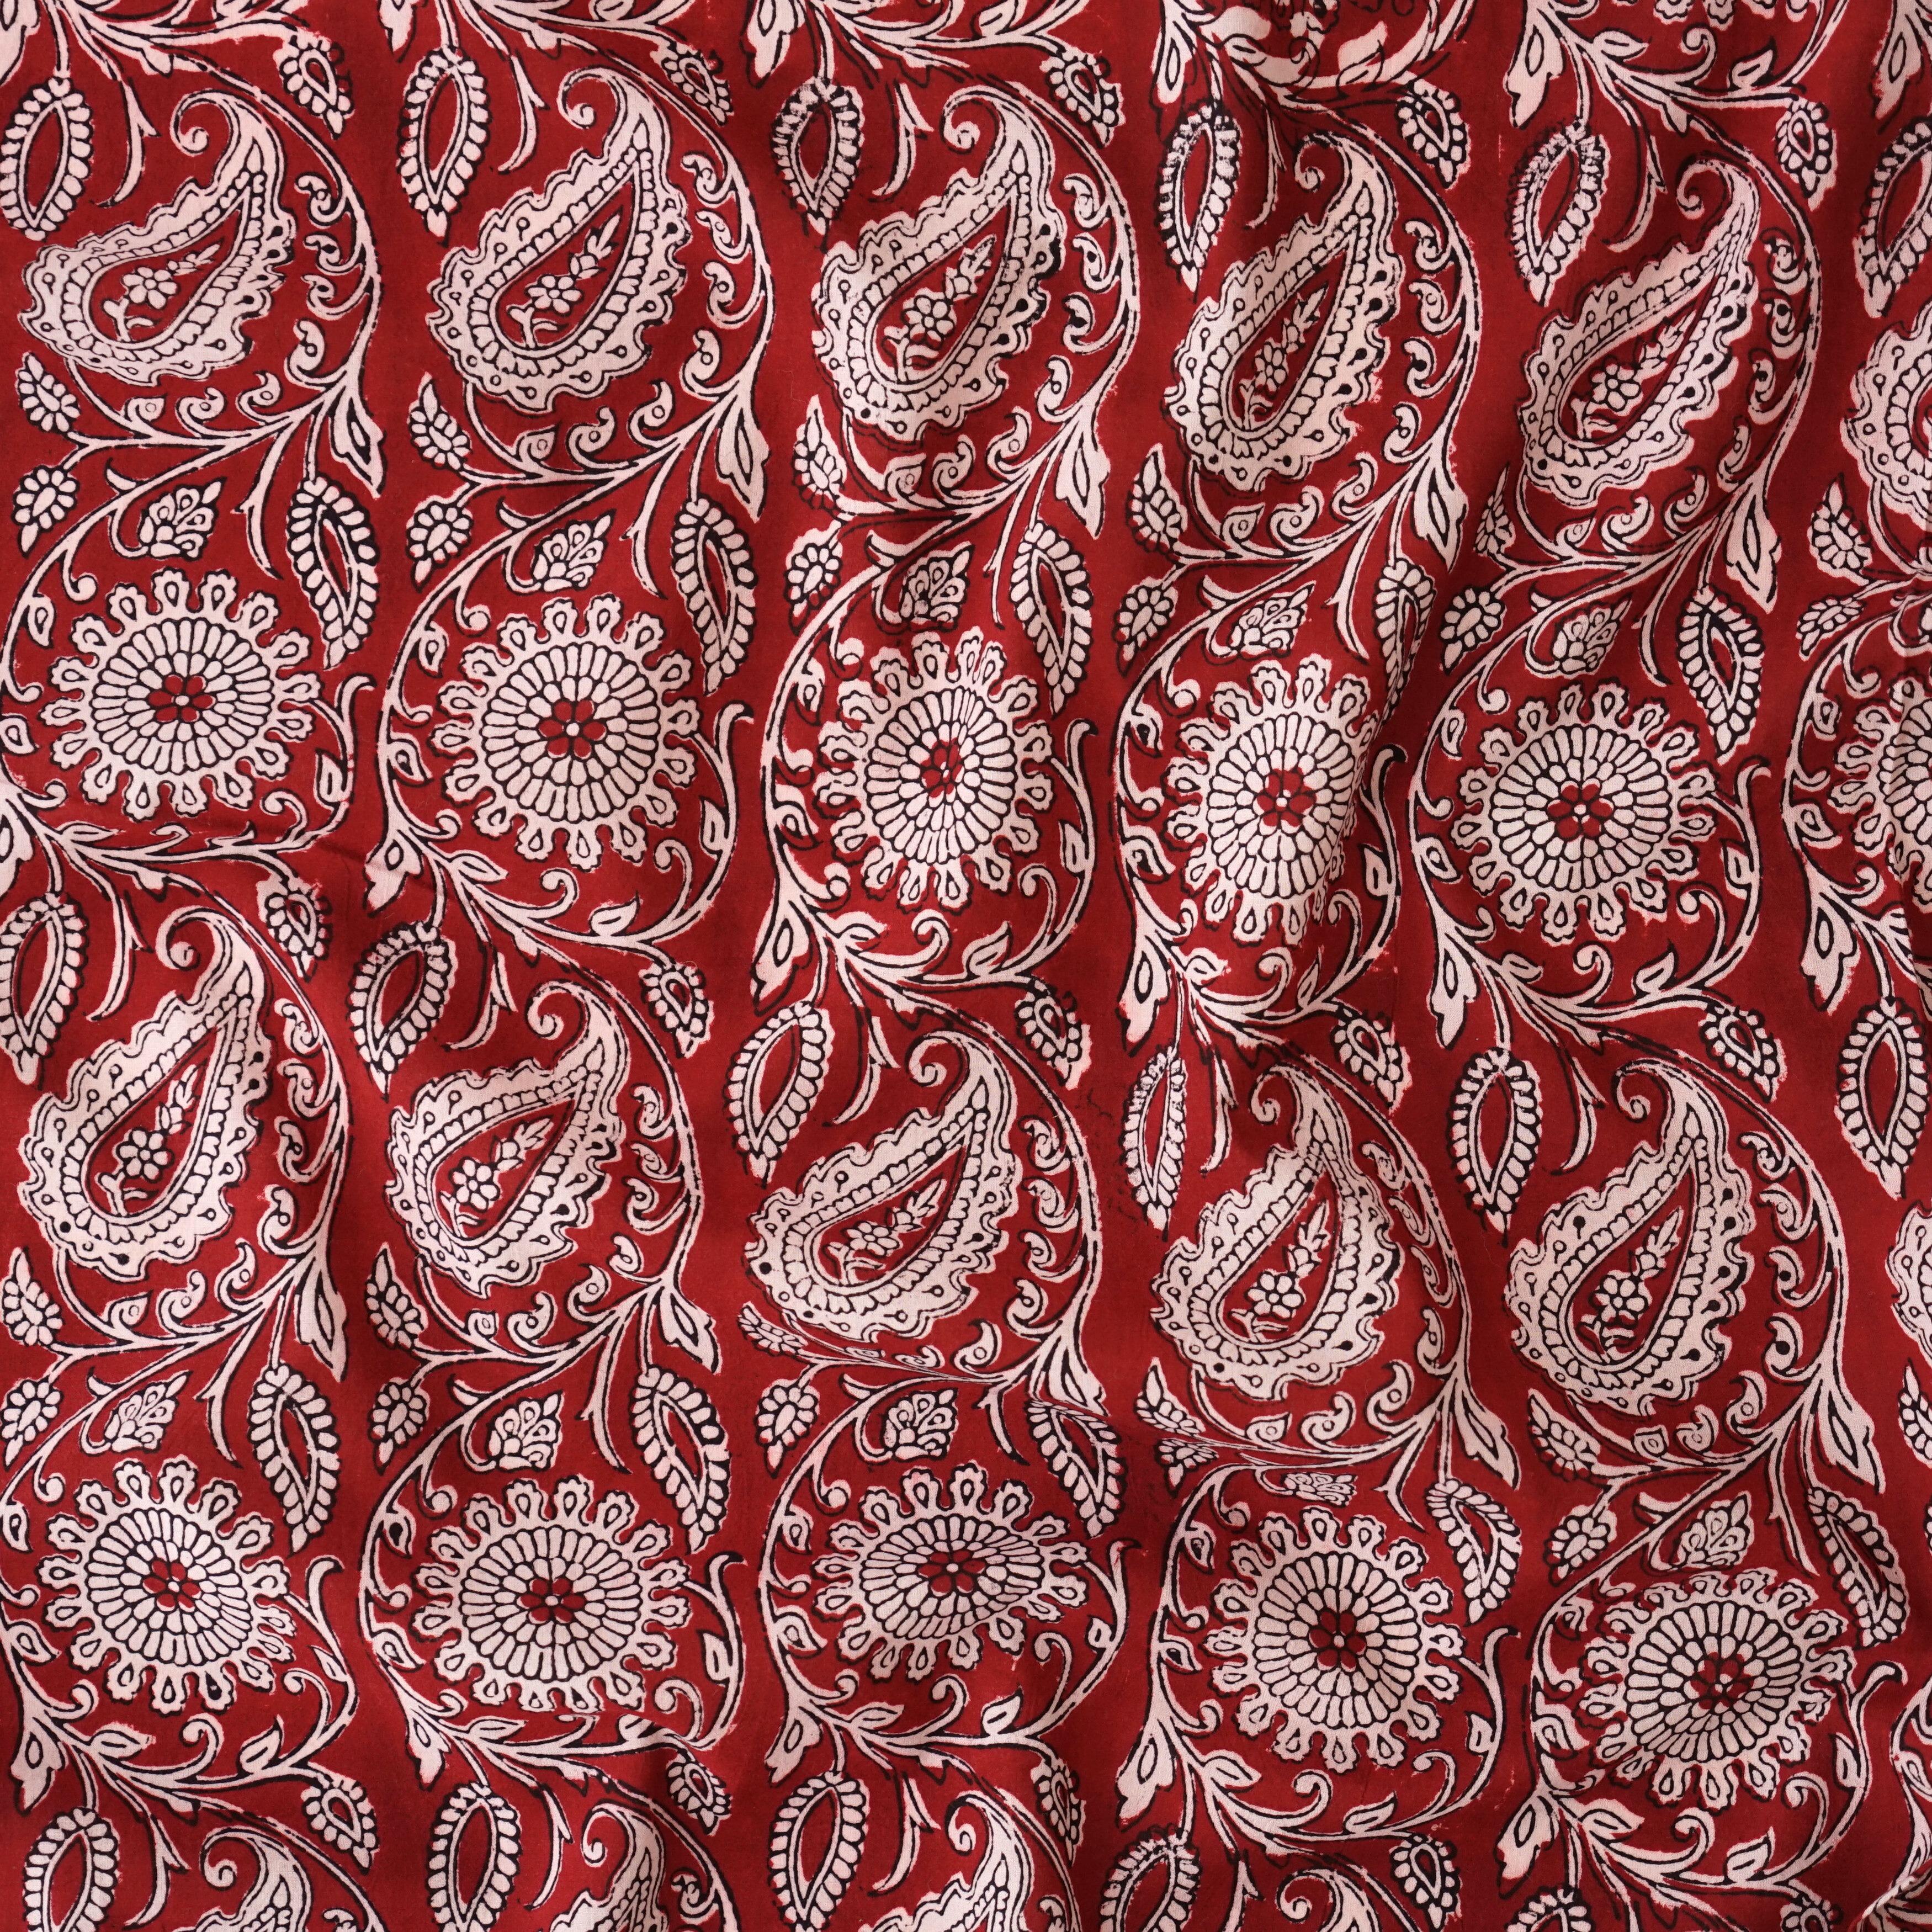 1 - ISK11 - 100% Block-Printed Cotton Fabric From India - Sichuan Pepper Design - Iron Rust Black & Alizarin Red Dyes - Contrast